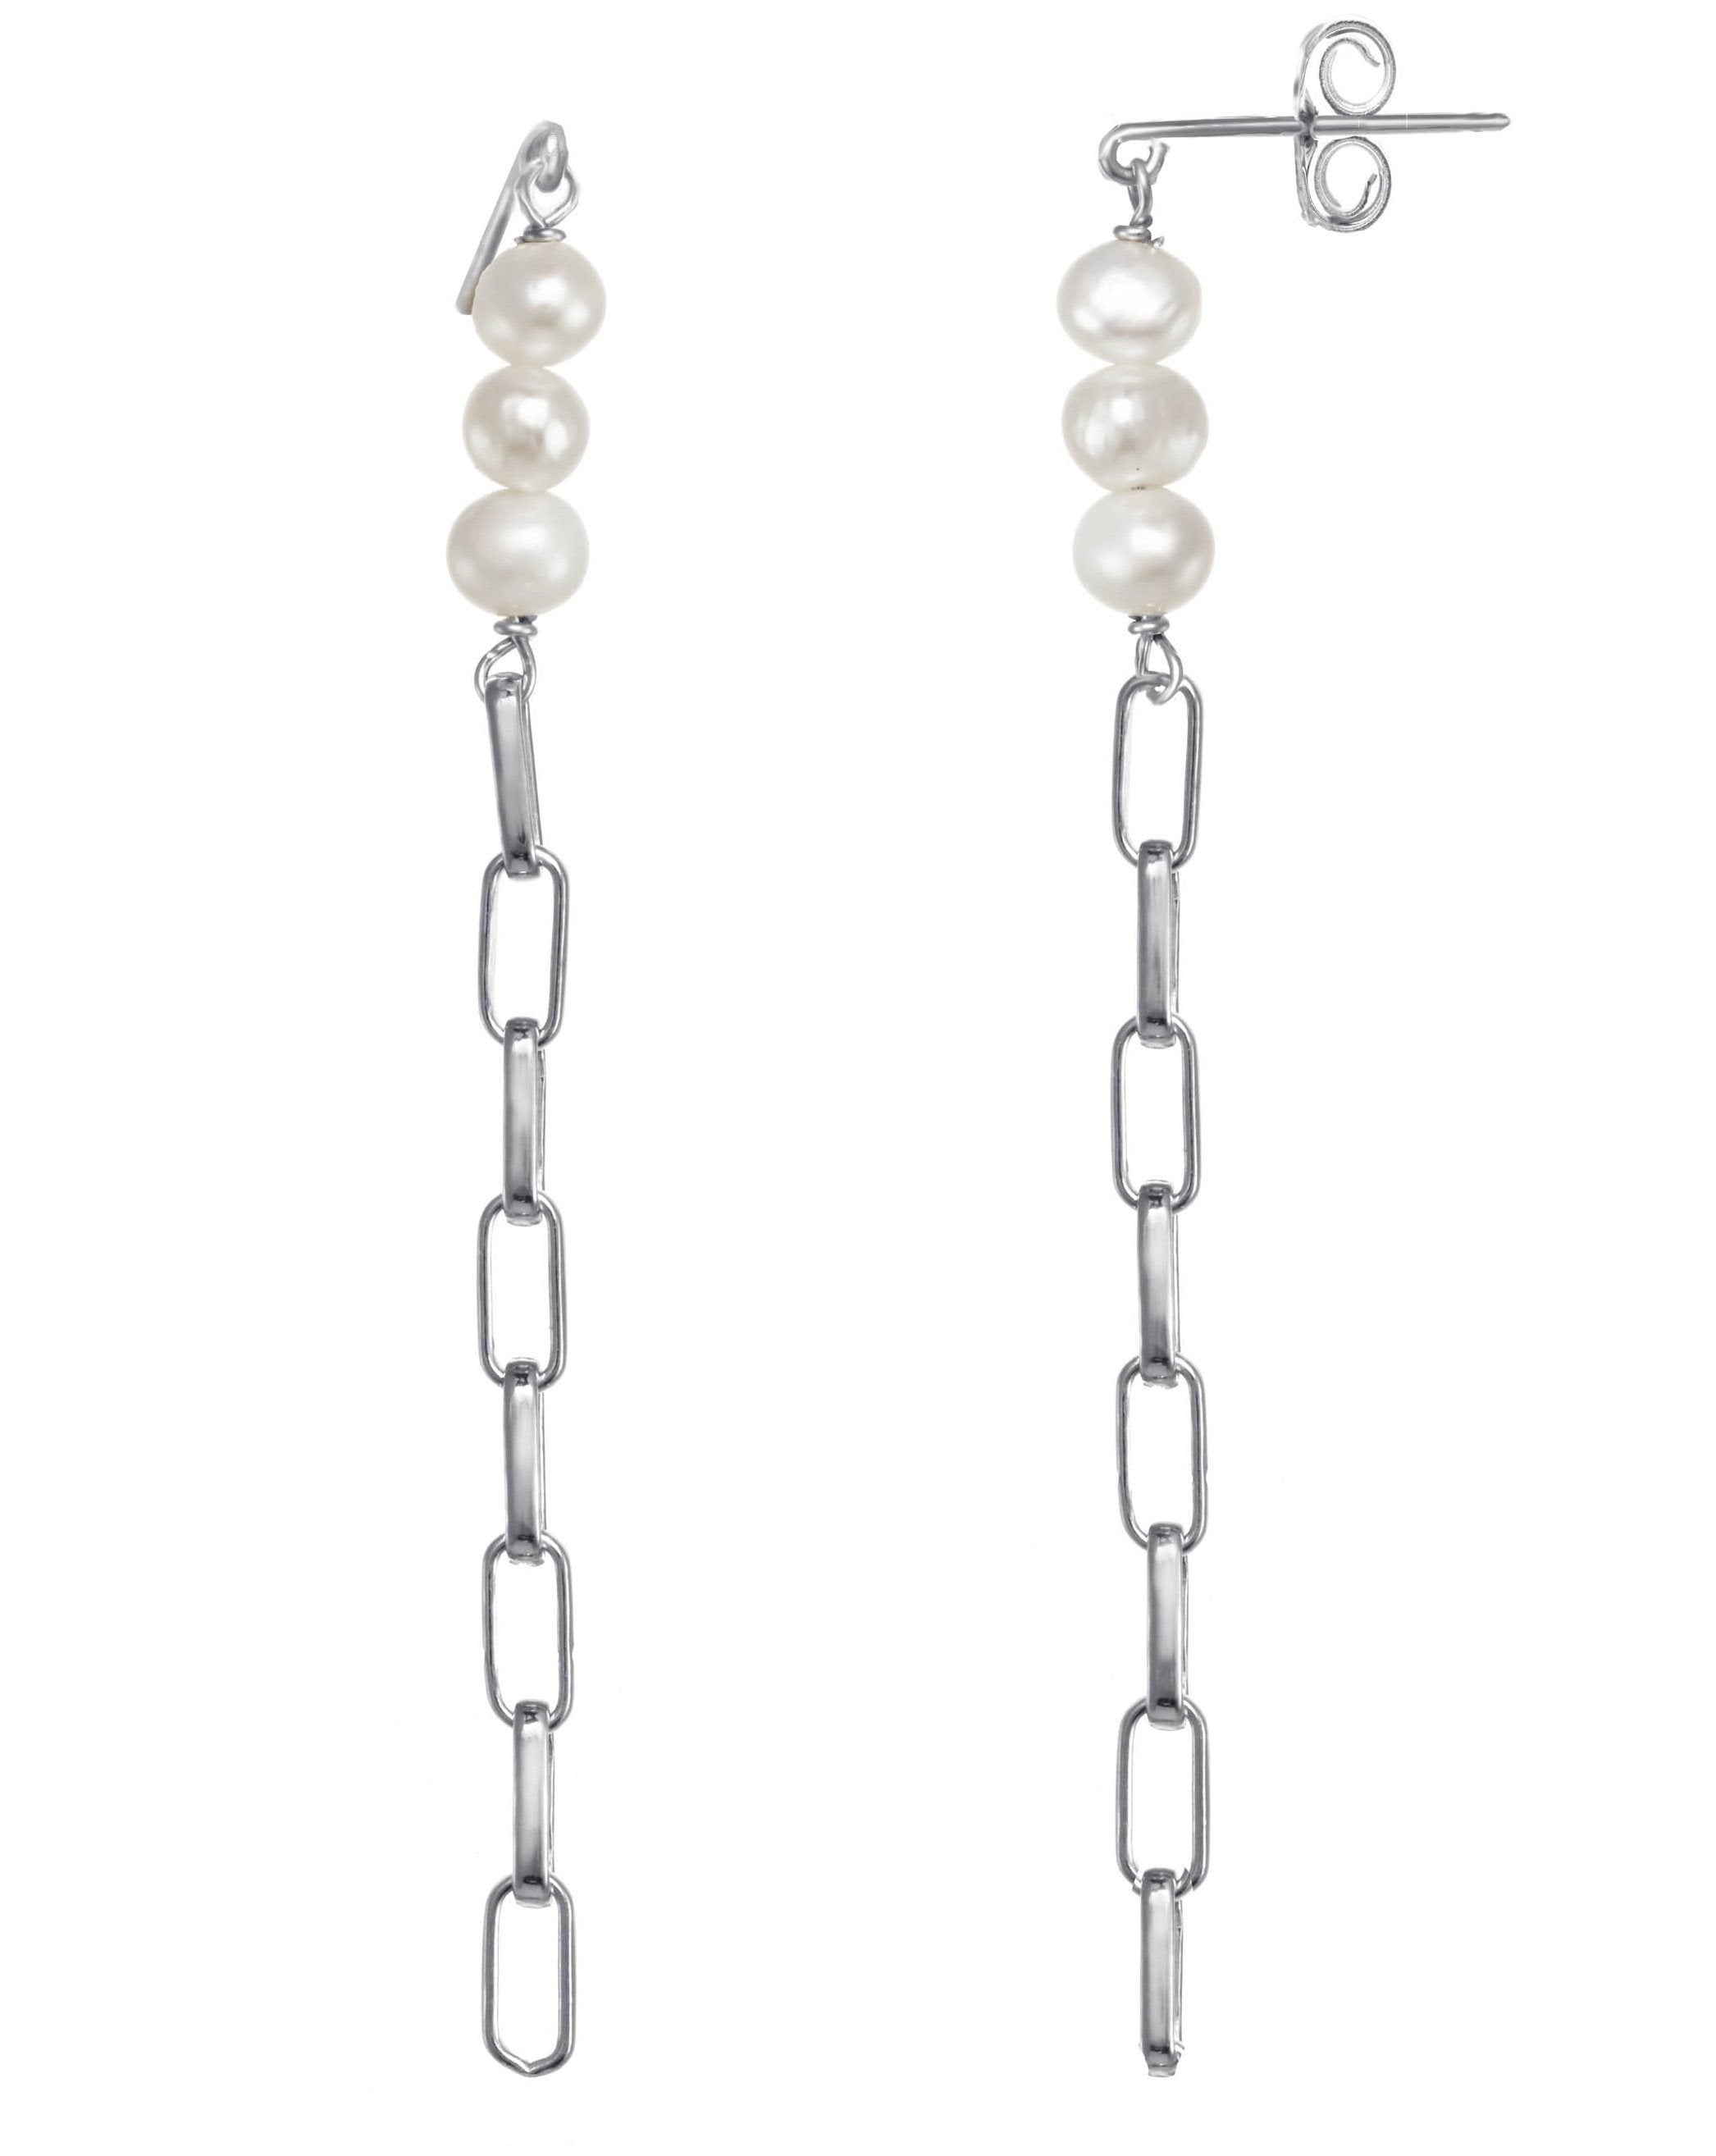 Anaisha Earrings by Kozakh. Chain style drop earrings in Sterling Silver with 5mm round Pearls.